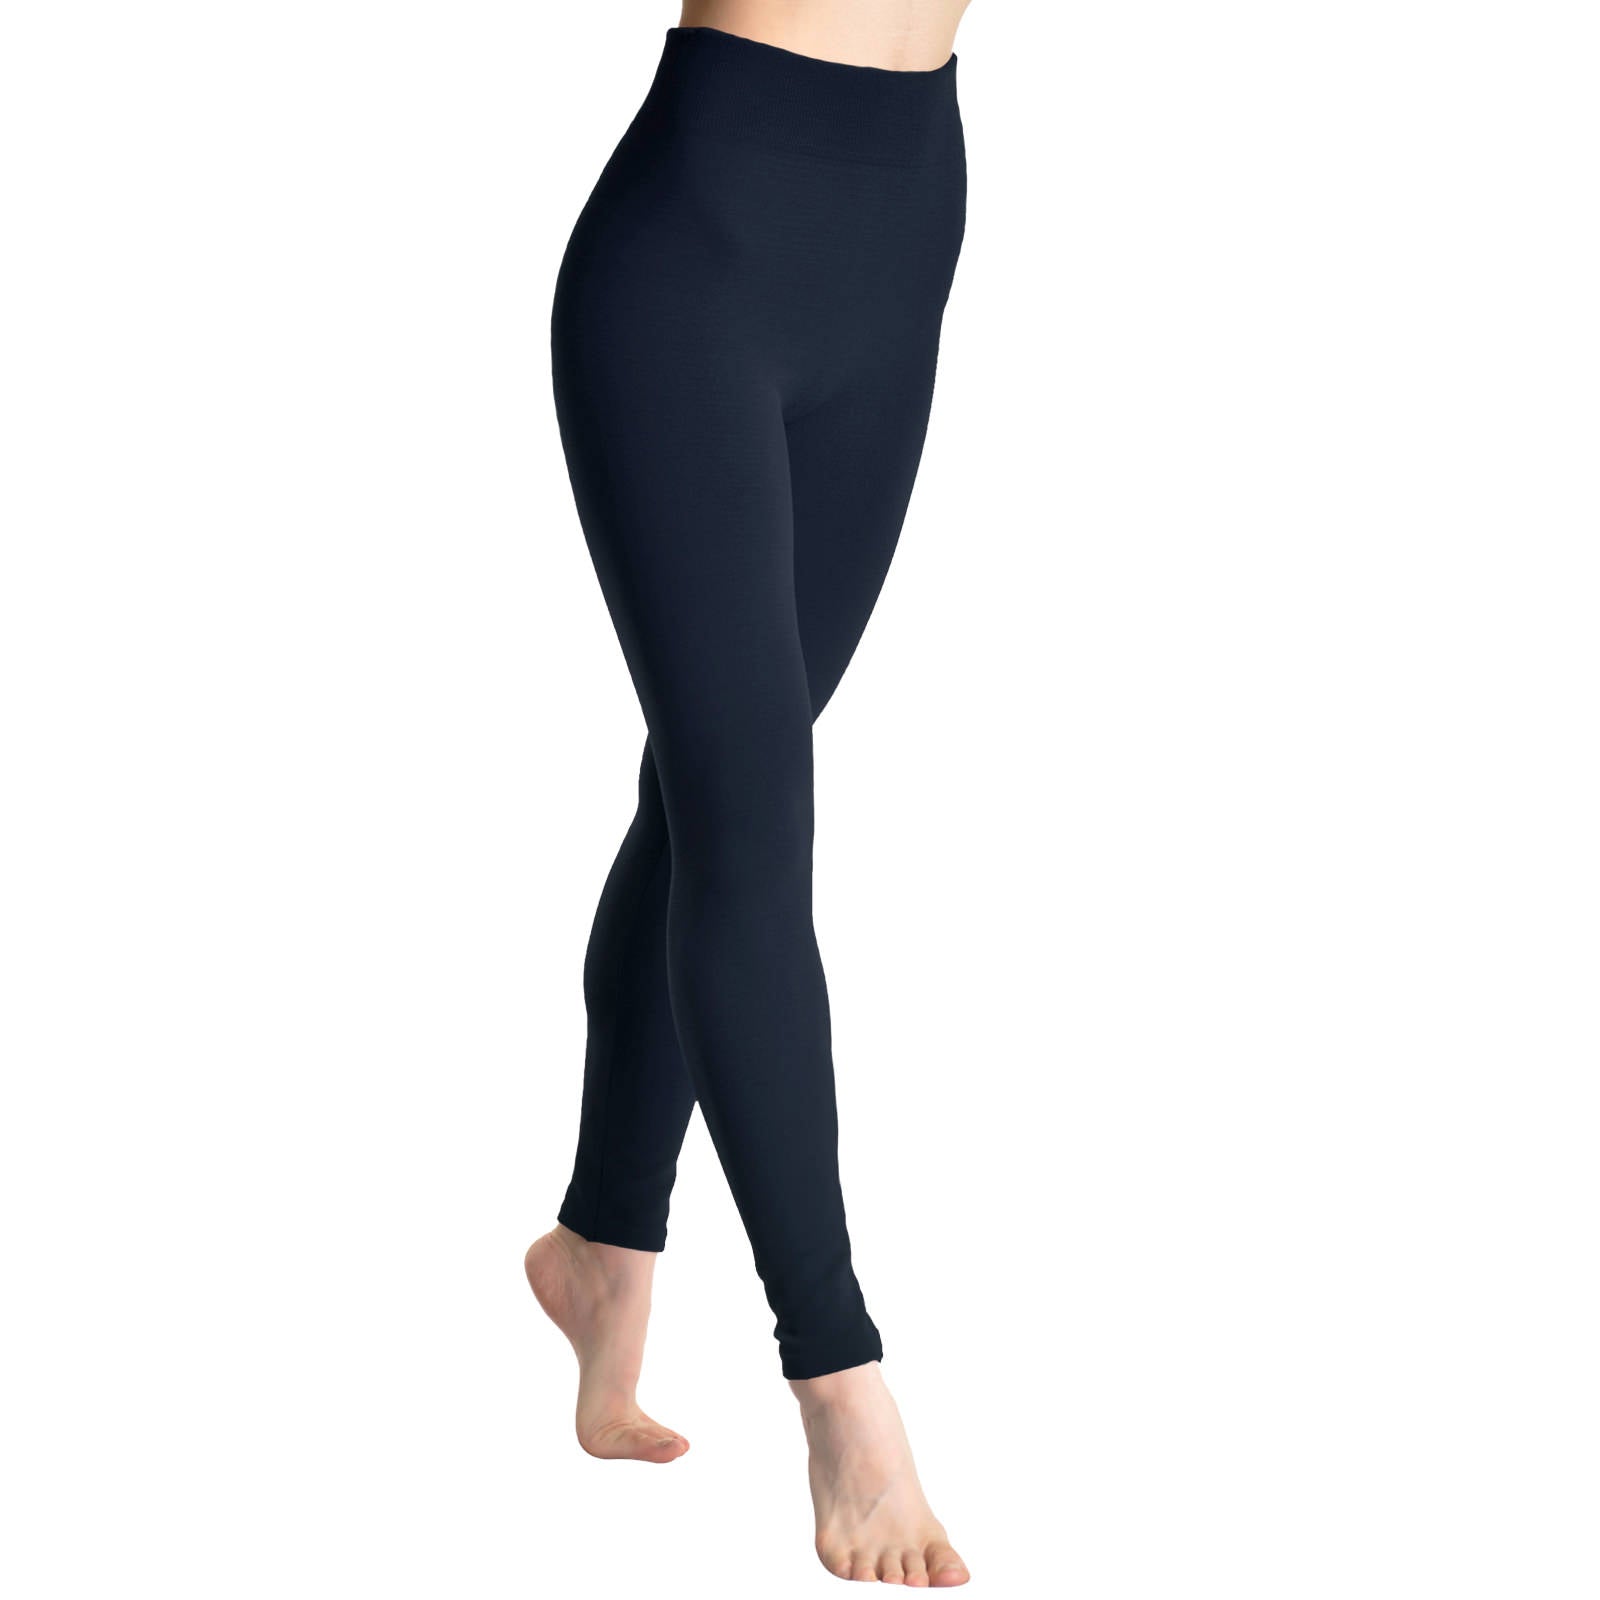 Up To 40% Off on Angelina Fleece Thermal Tight